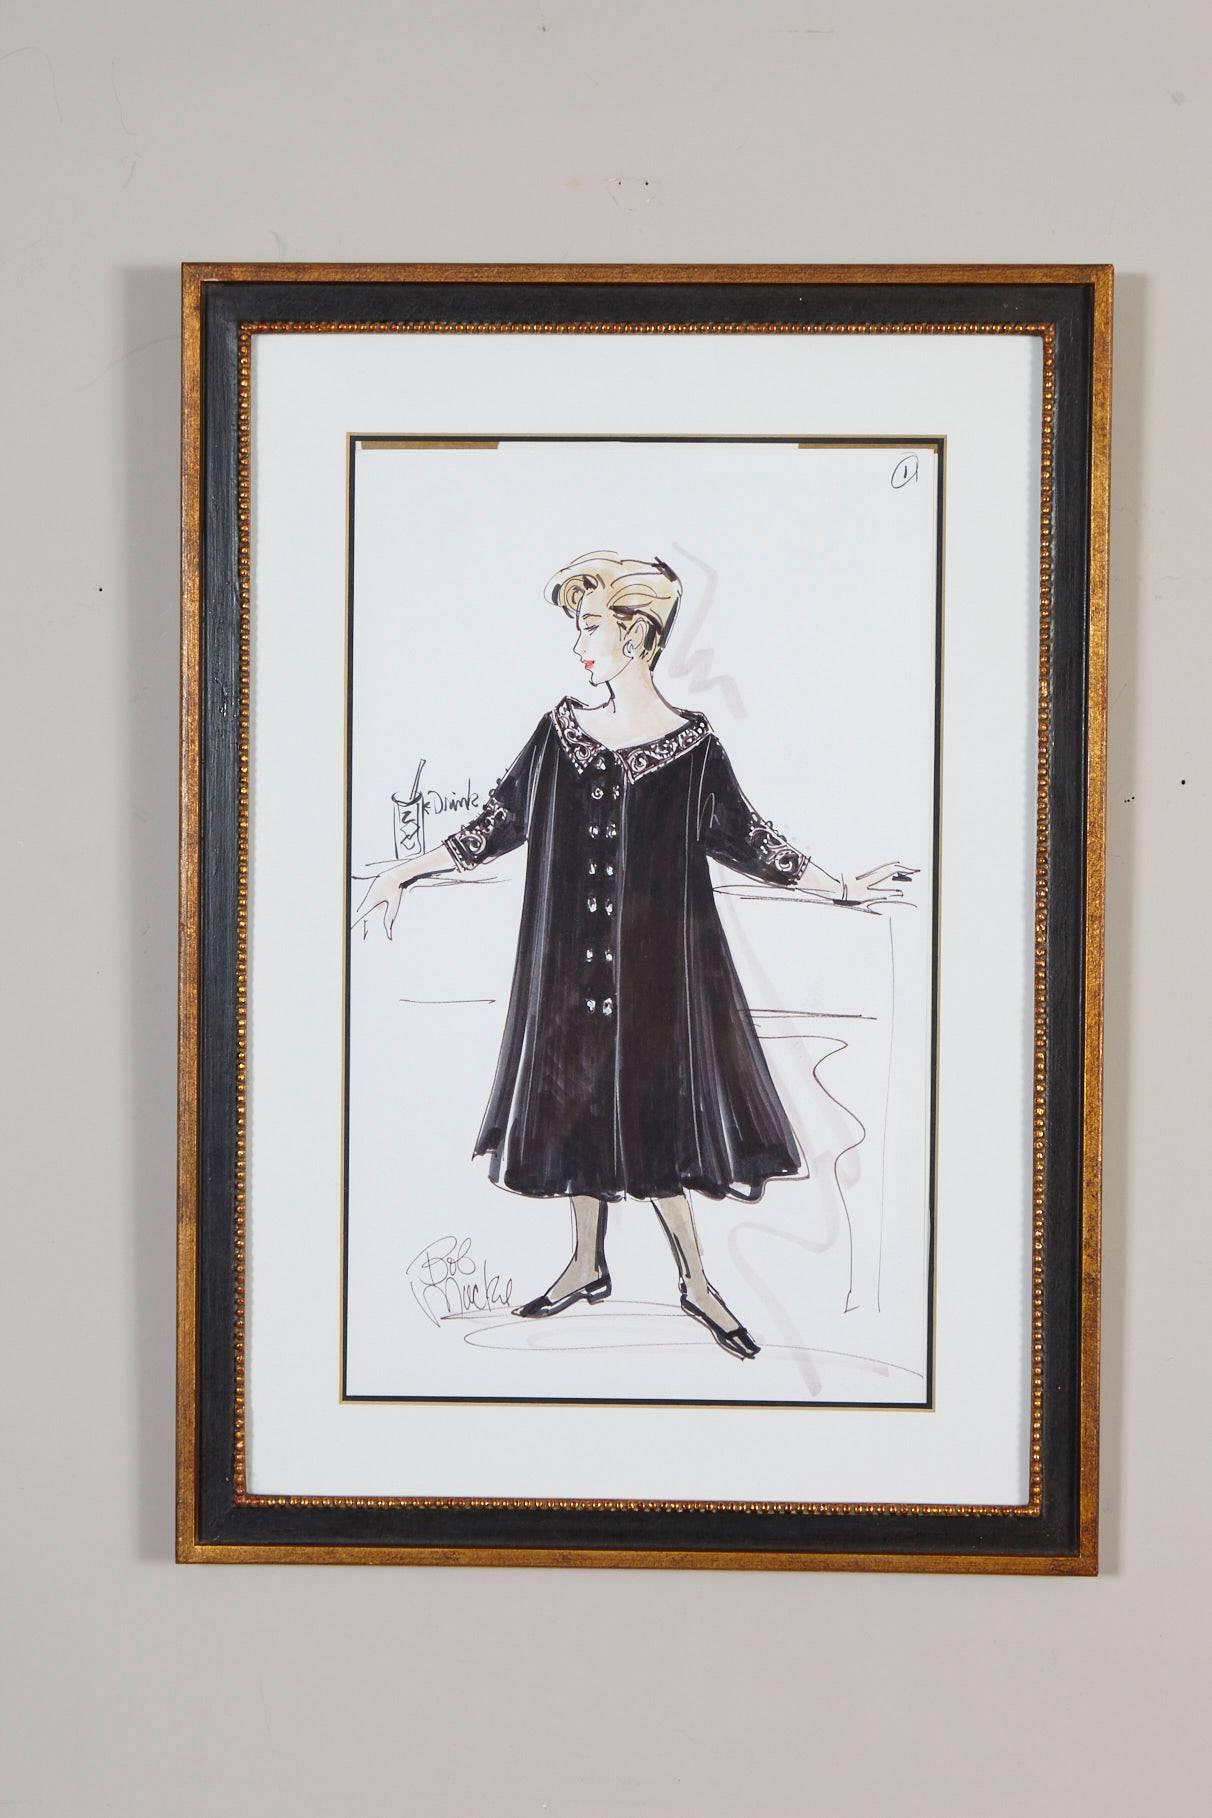 A must for every fashionista! Signed Bob Mackie ink and watercolor fashion drawing of a show dress proposal for Rosemary Clooney, from the estate of Rosemary Clooney.
Framed in a black and gilded frame under glass.
This unique piece can be